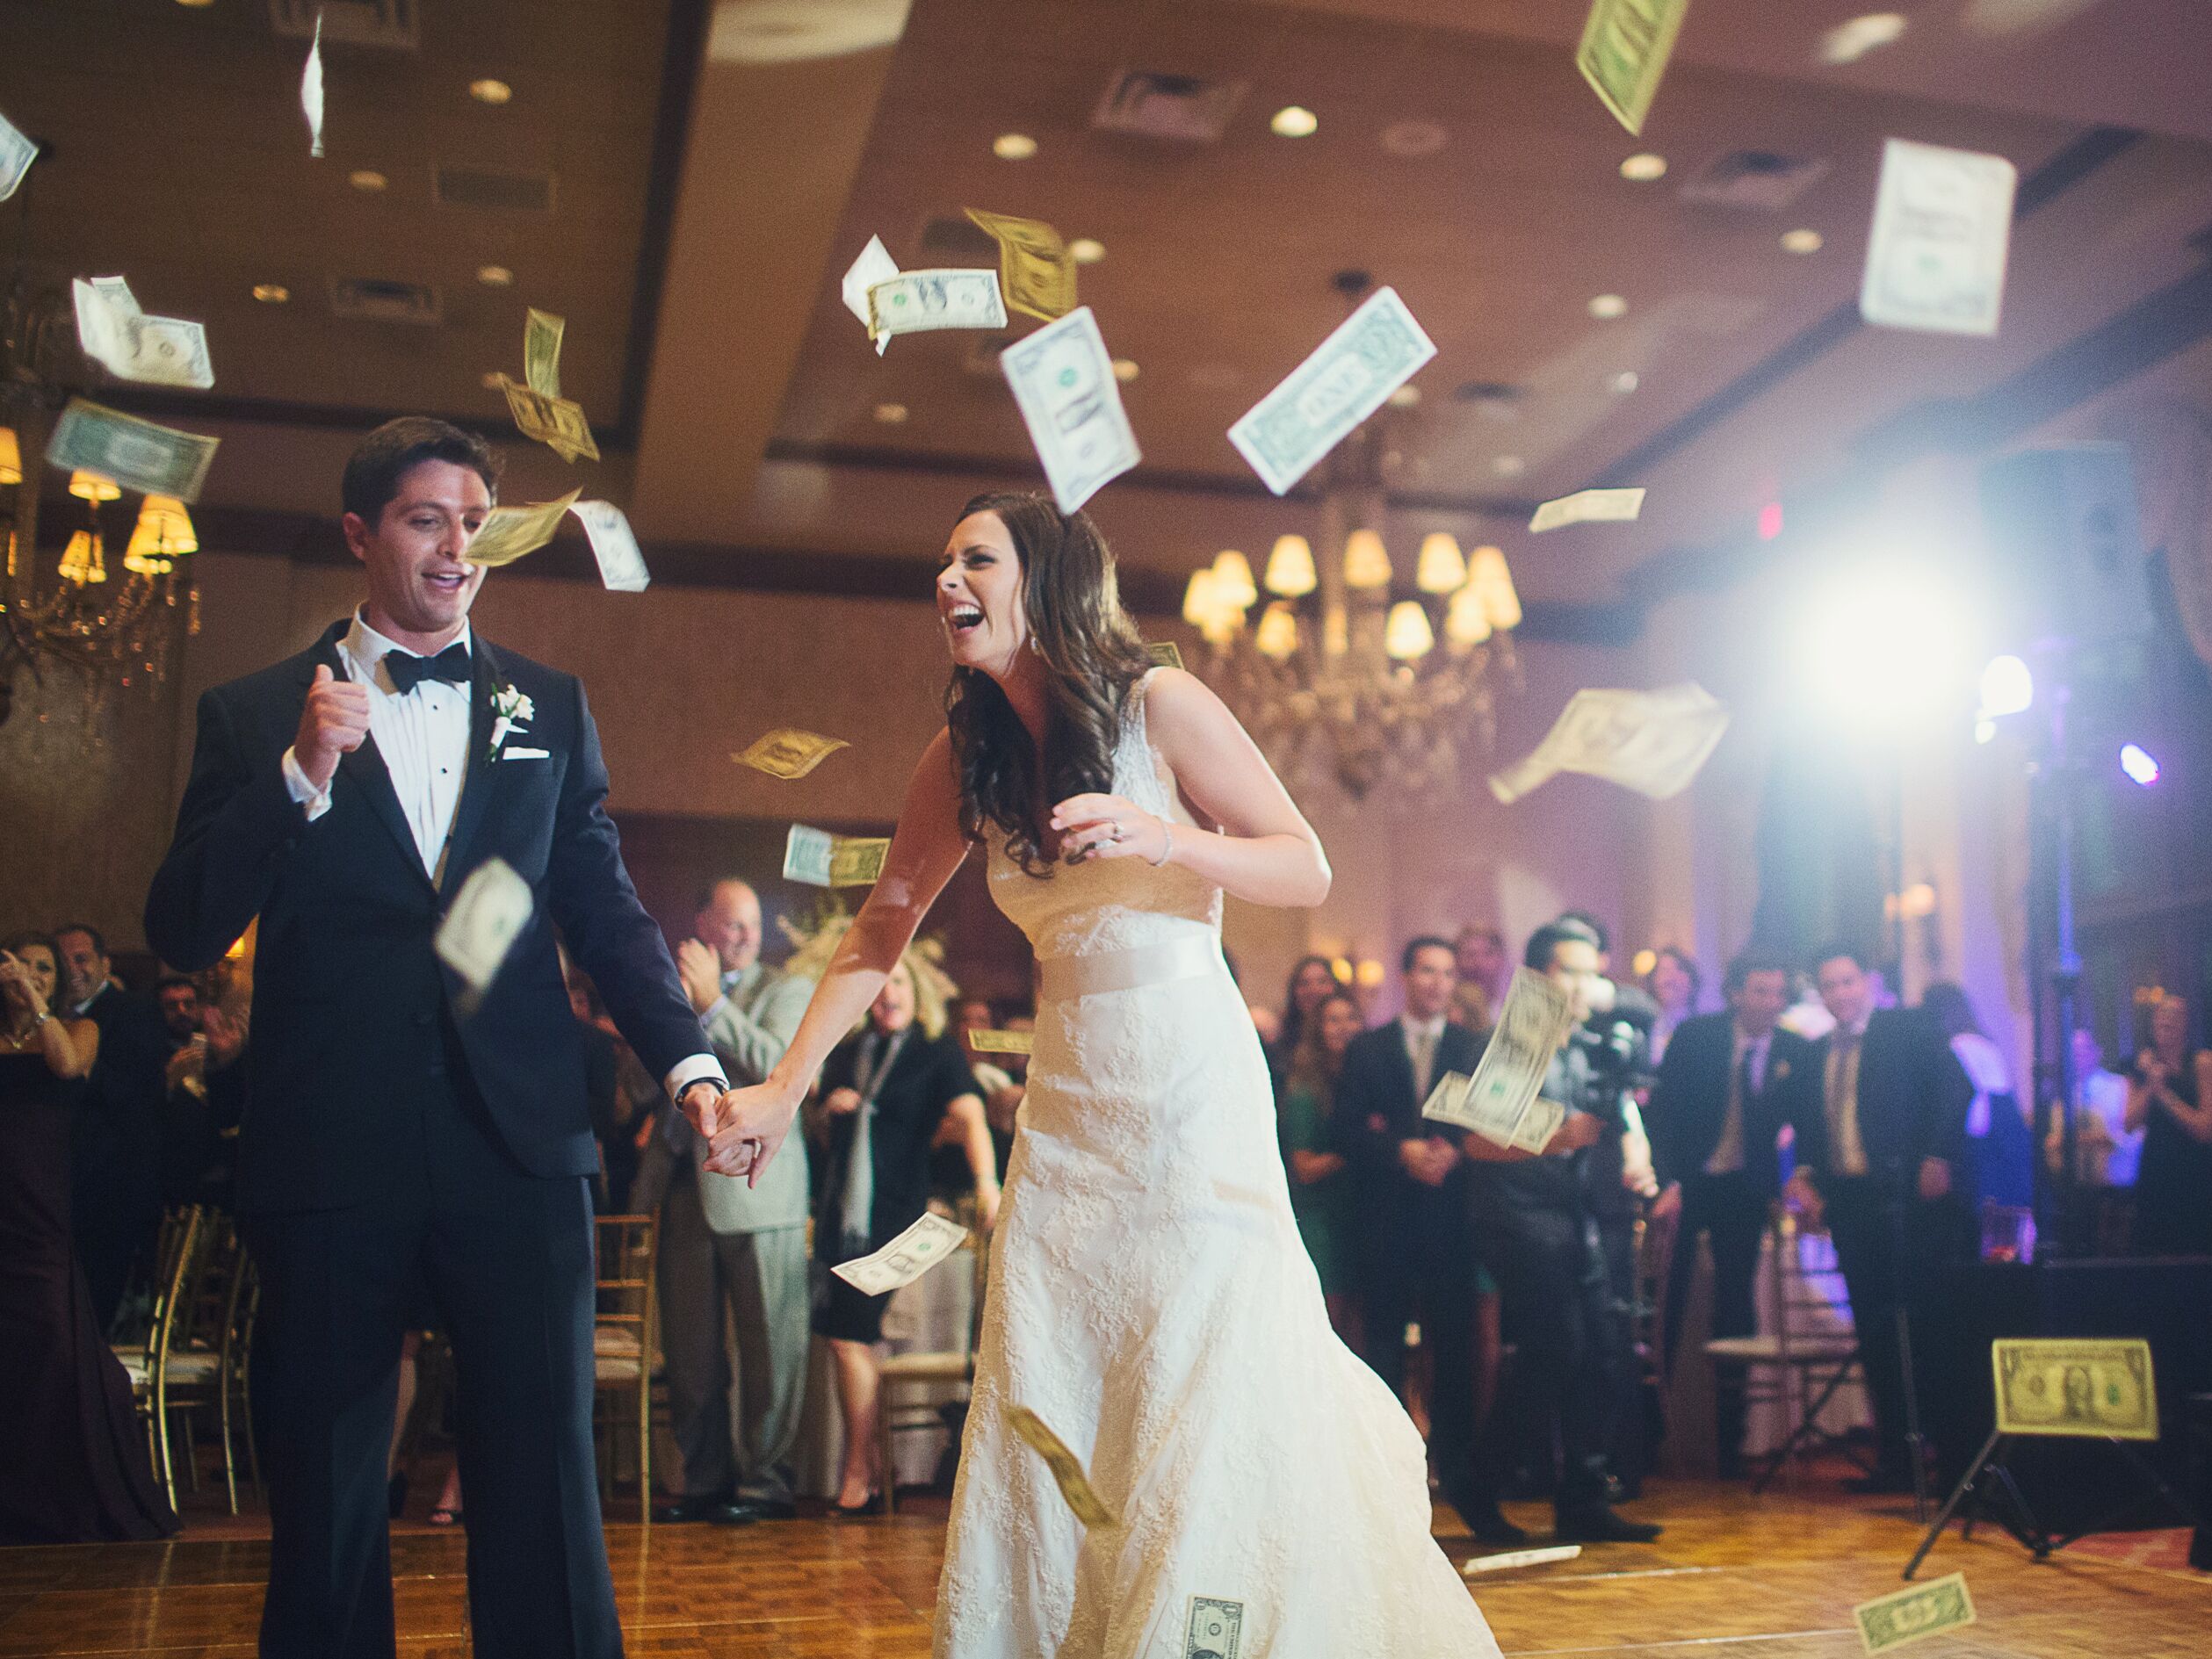 What are wedding loans?